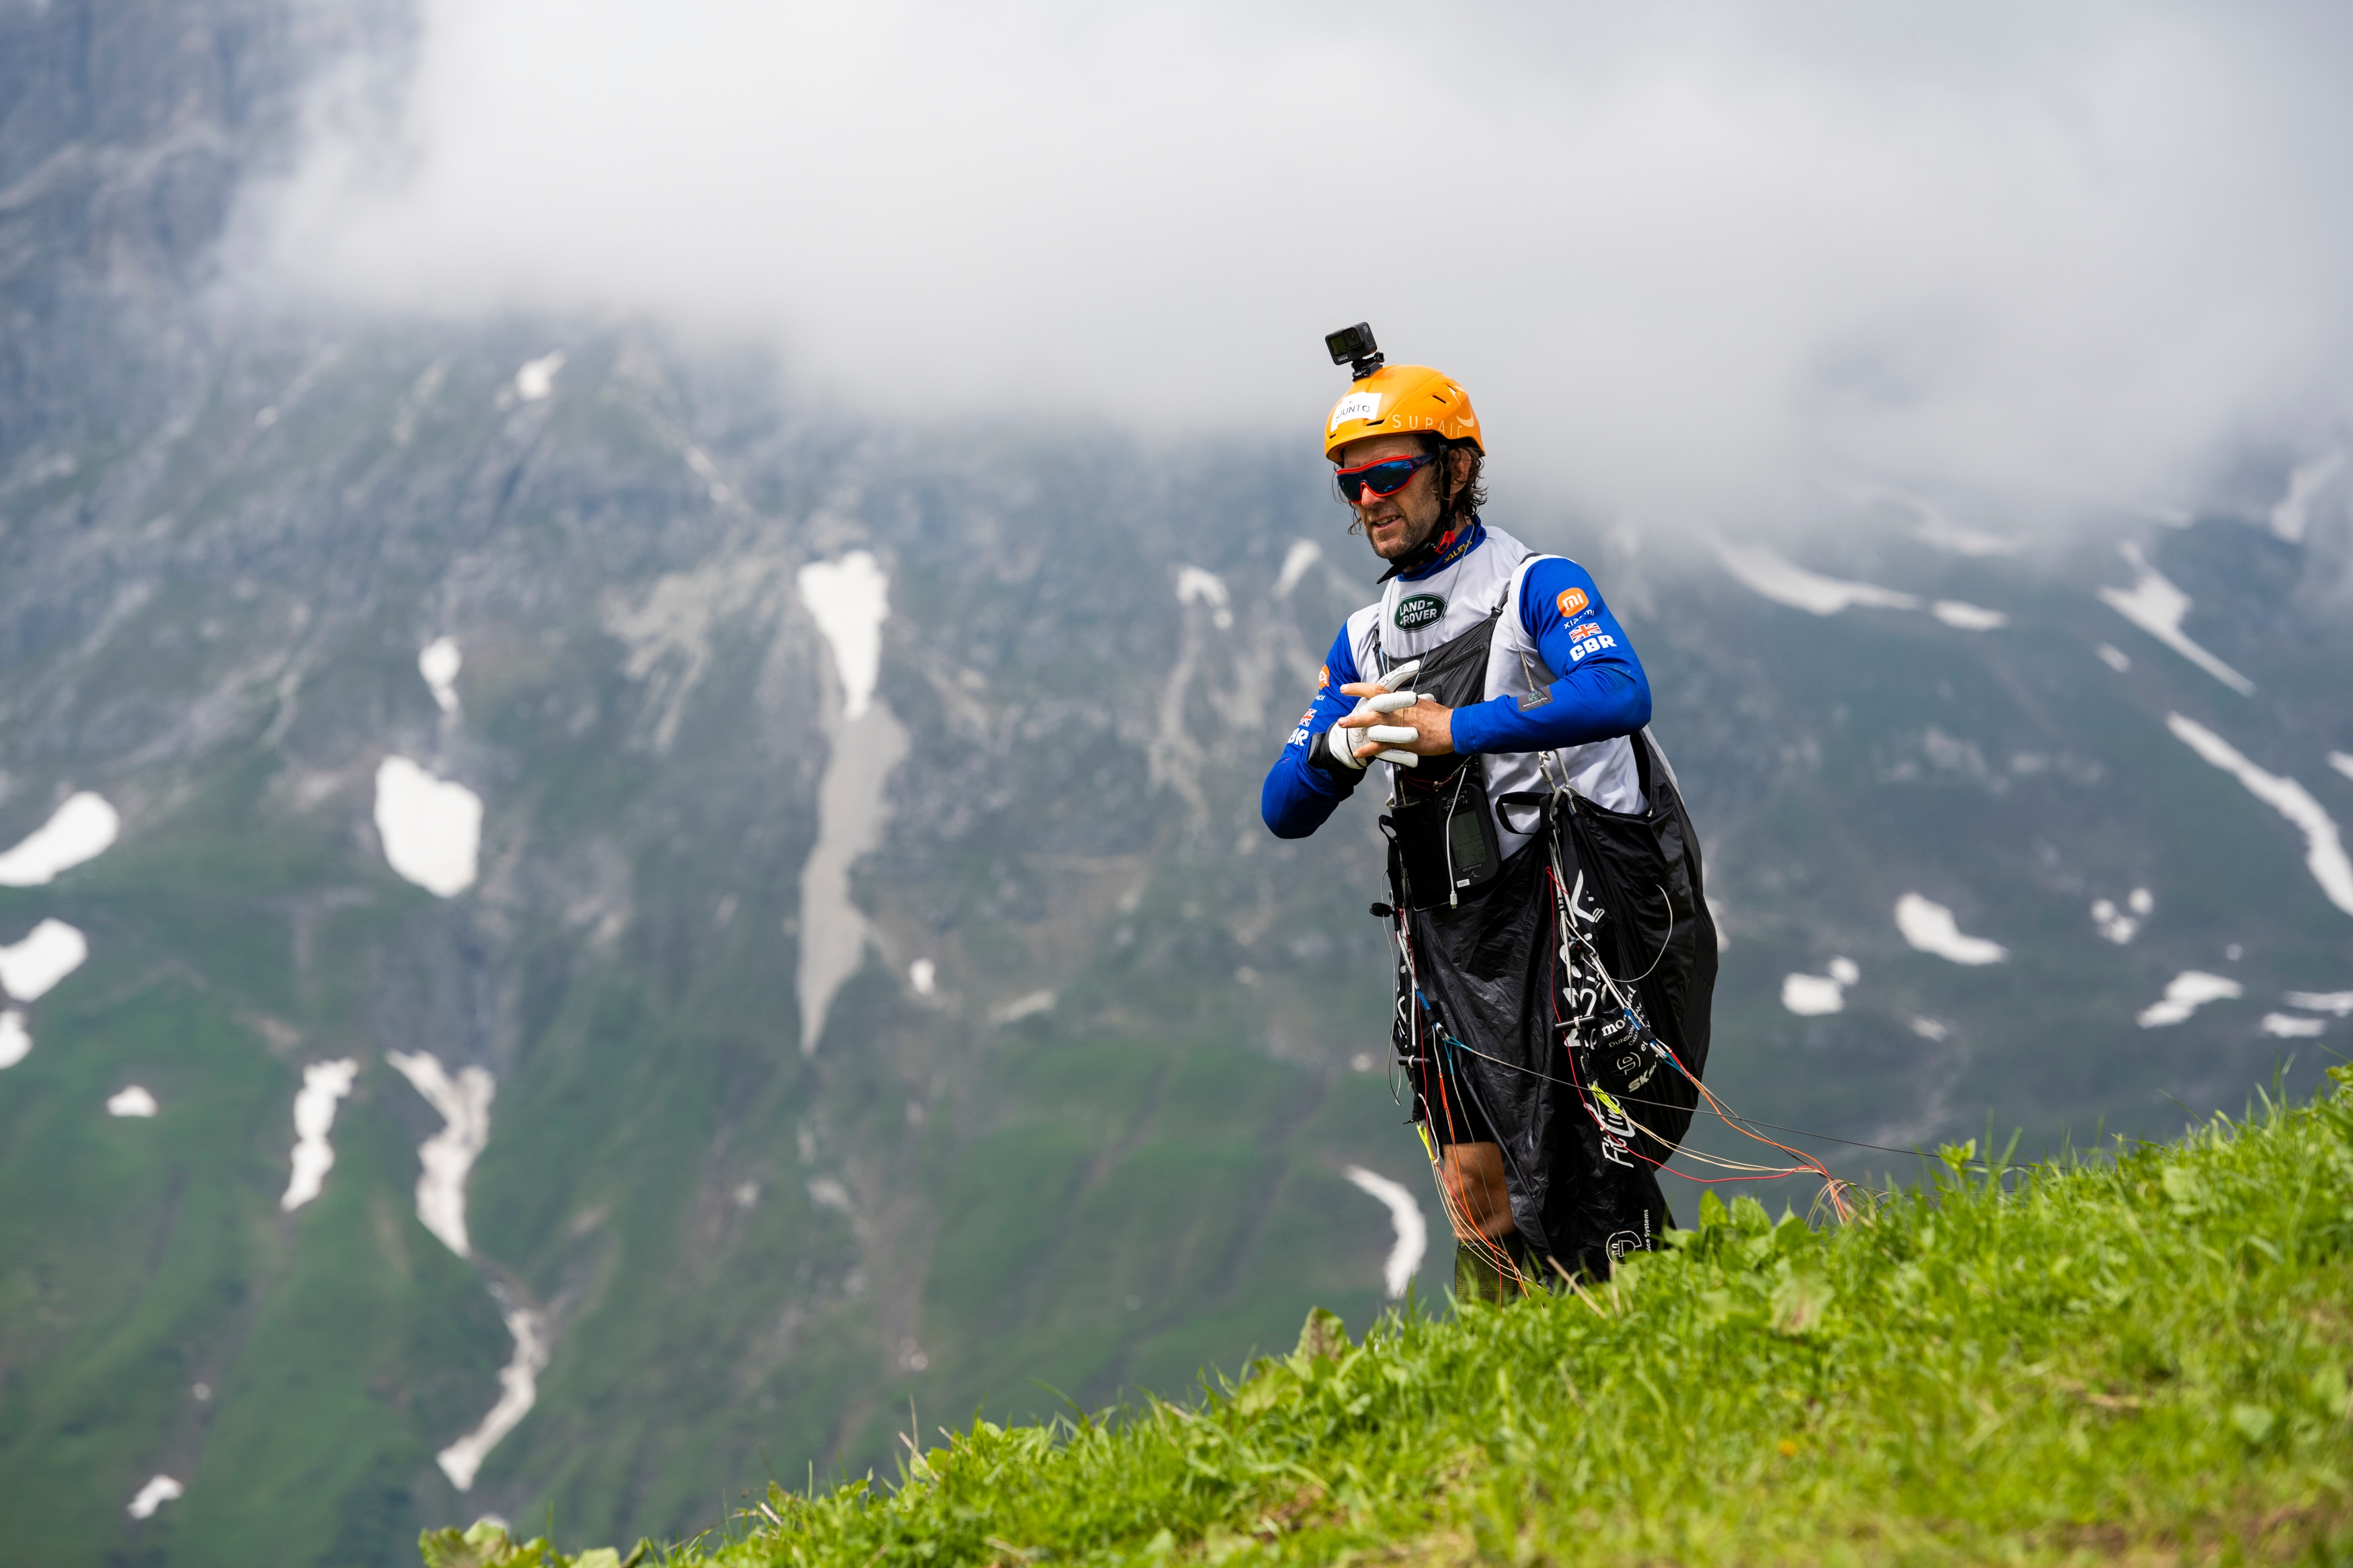 GBR pre-launch during X-Alps in Warth, Austria on June 24, 2021